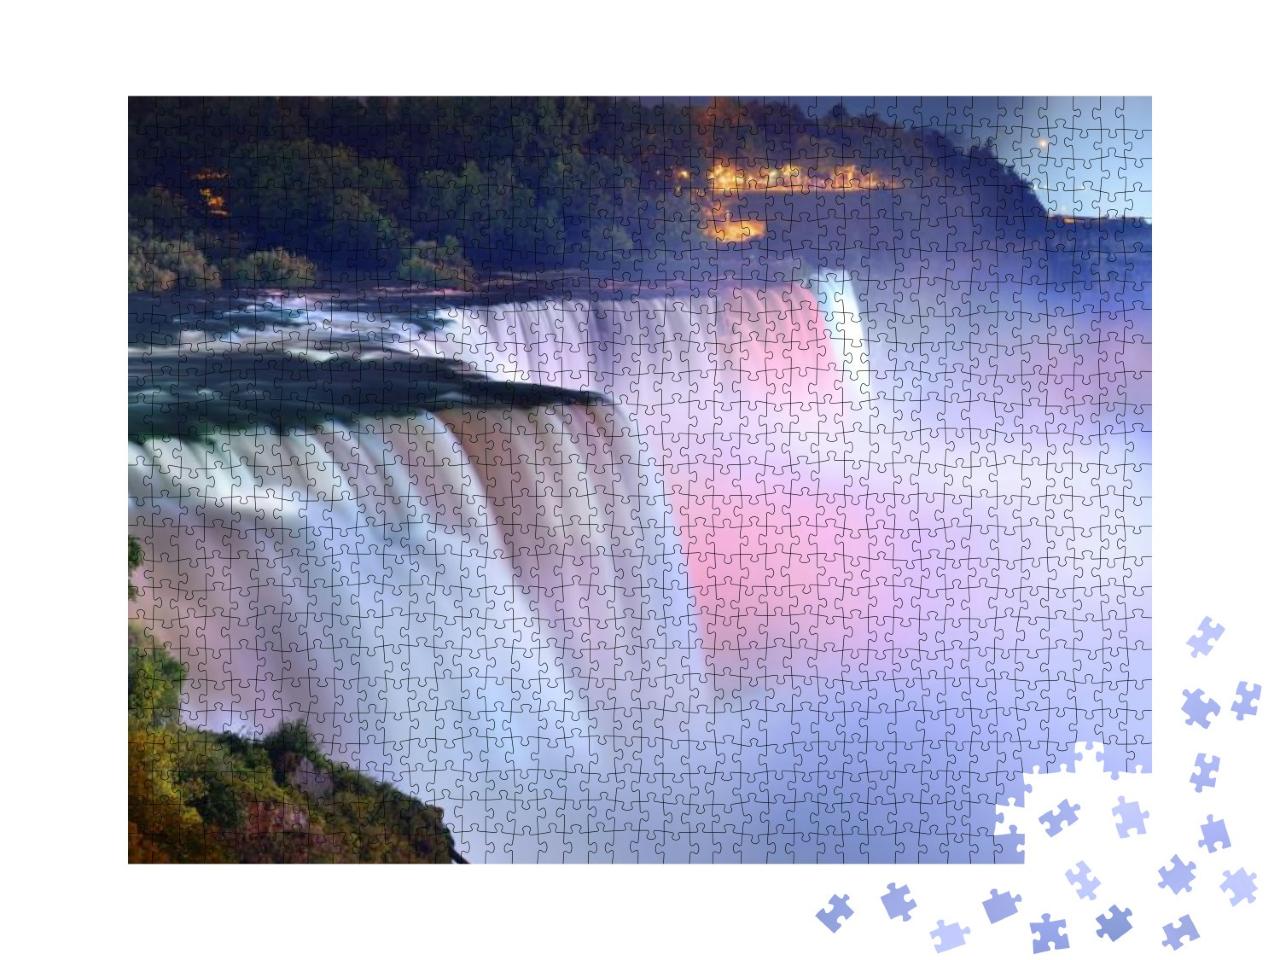 Niagara Falls Lit At Night by Colorful Lights... Jigsaw Puzzle with 1000 pieces